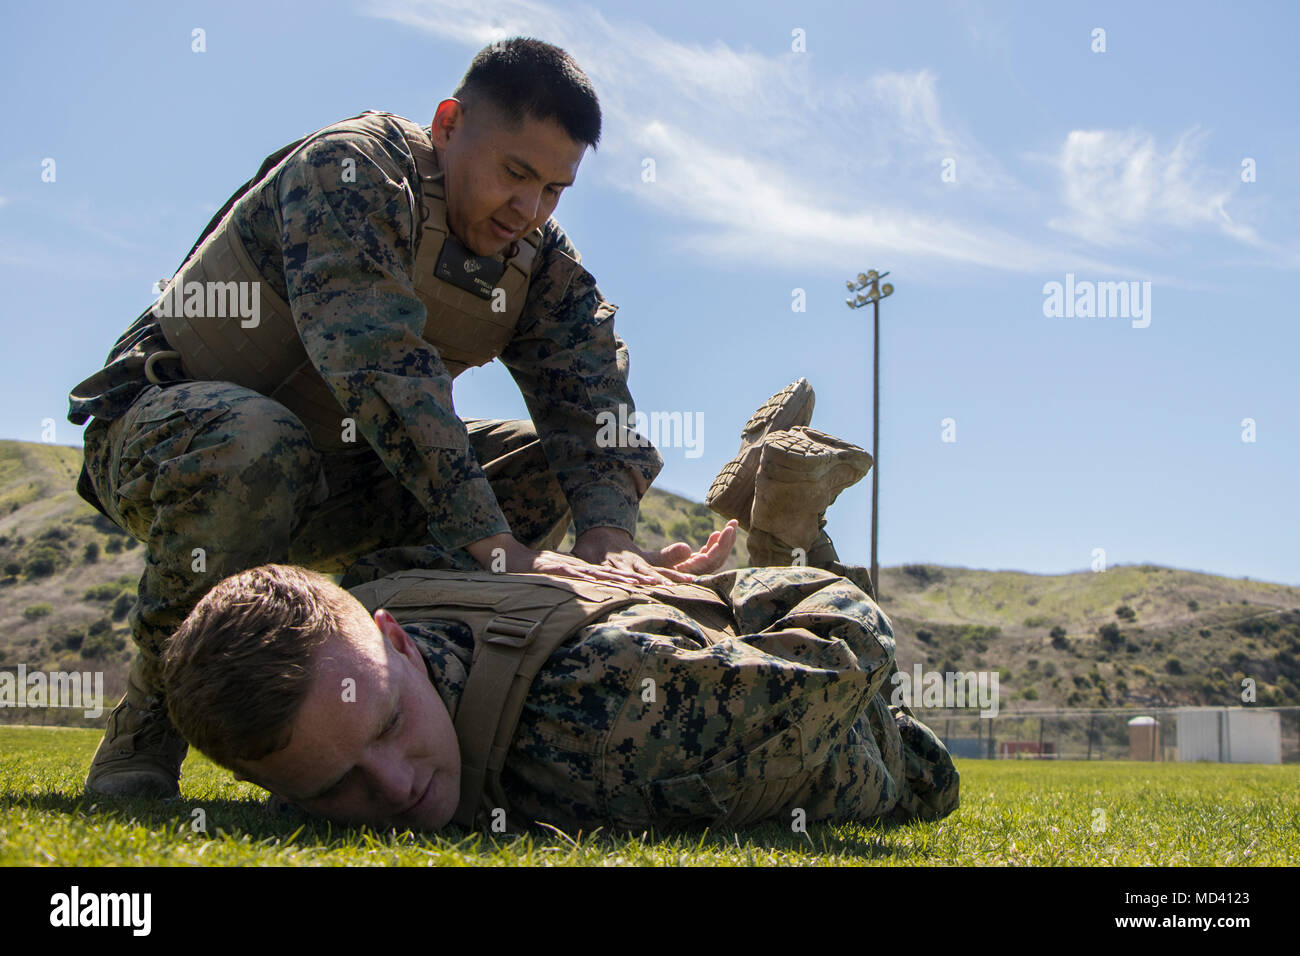 U.S. Marine Corps Lance Cpl. Oscar Estrella with Marine Aviation Logistics Squadron 39 (MALS-39) holds down Lance. Cpl. Izaak Long with Marine Aviation Logistics Squadron 39 (MALS-39), during a Marine Corps Martial Arts Program (MCMAP) session on Camp Pendleton, Calif., March 19, 2018. MCMAP teaches Marines the fundamentals of hand-to-hand combat, ground fighting and self-defense techniques. (U.S. Marine Corps photo by Cpl. Andre Heath) Stock Photo